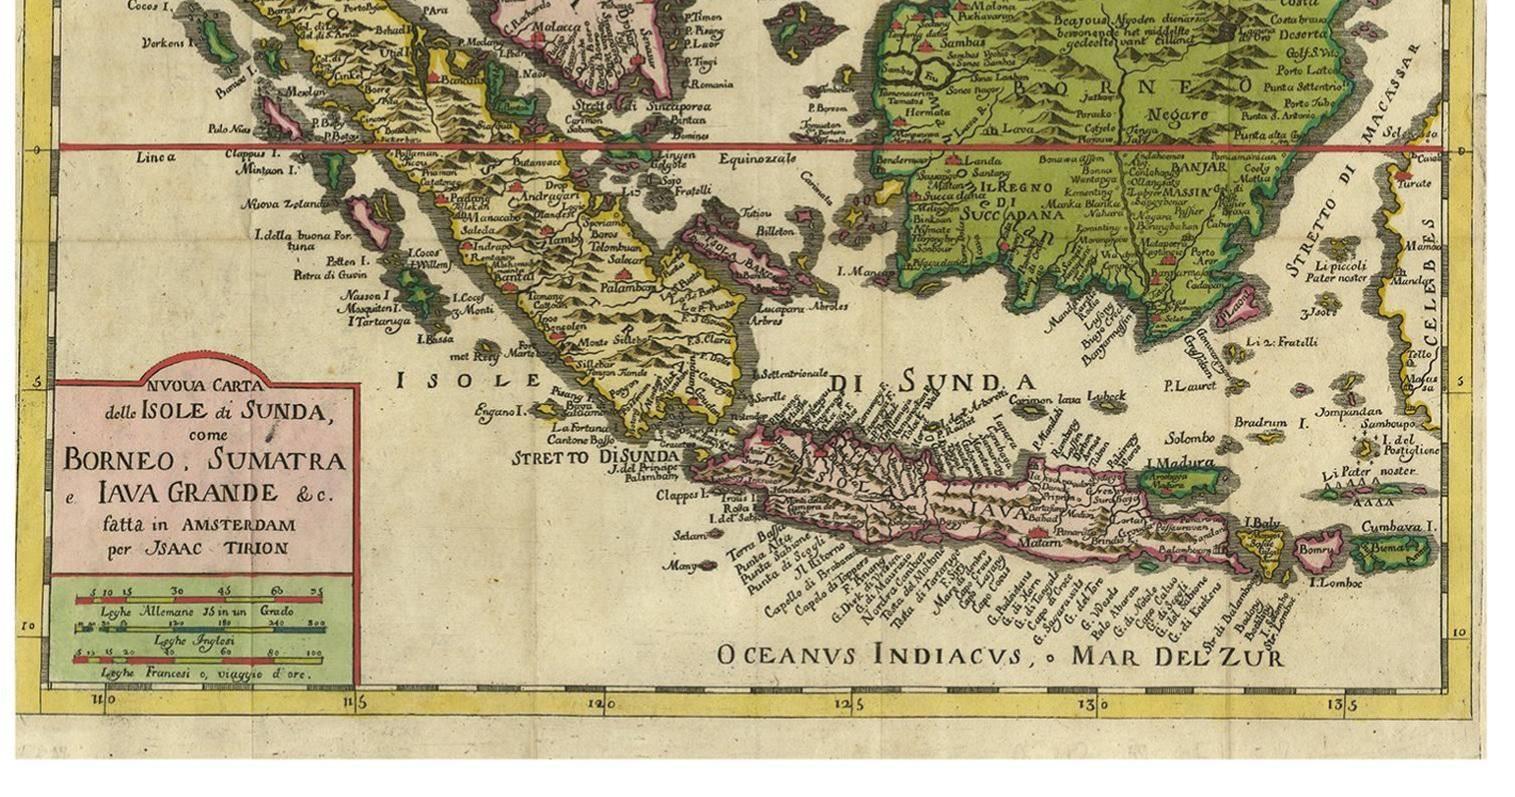 Detailed map, with beautiful hand-coloring, of Southeast Asia, extending from the tip of Cambodia to Java, centered on Singapore and the Straits of Malacca. This map originates from 'Atlante novissimo che contiene tutte le parti del mondo' by G.